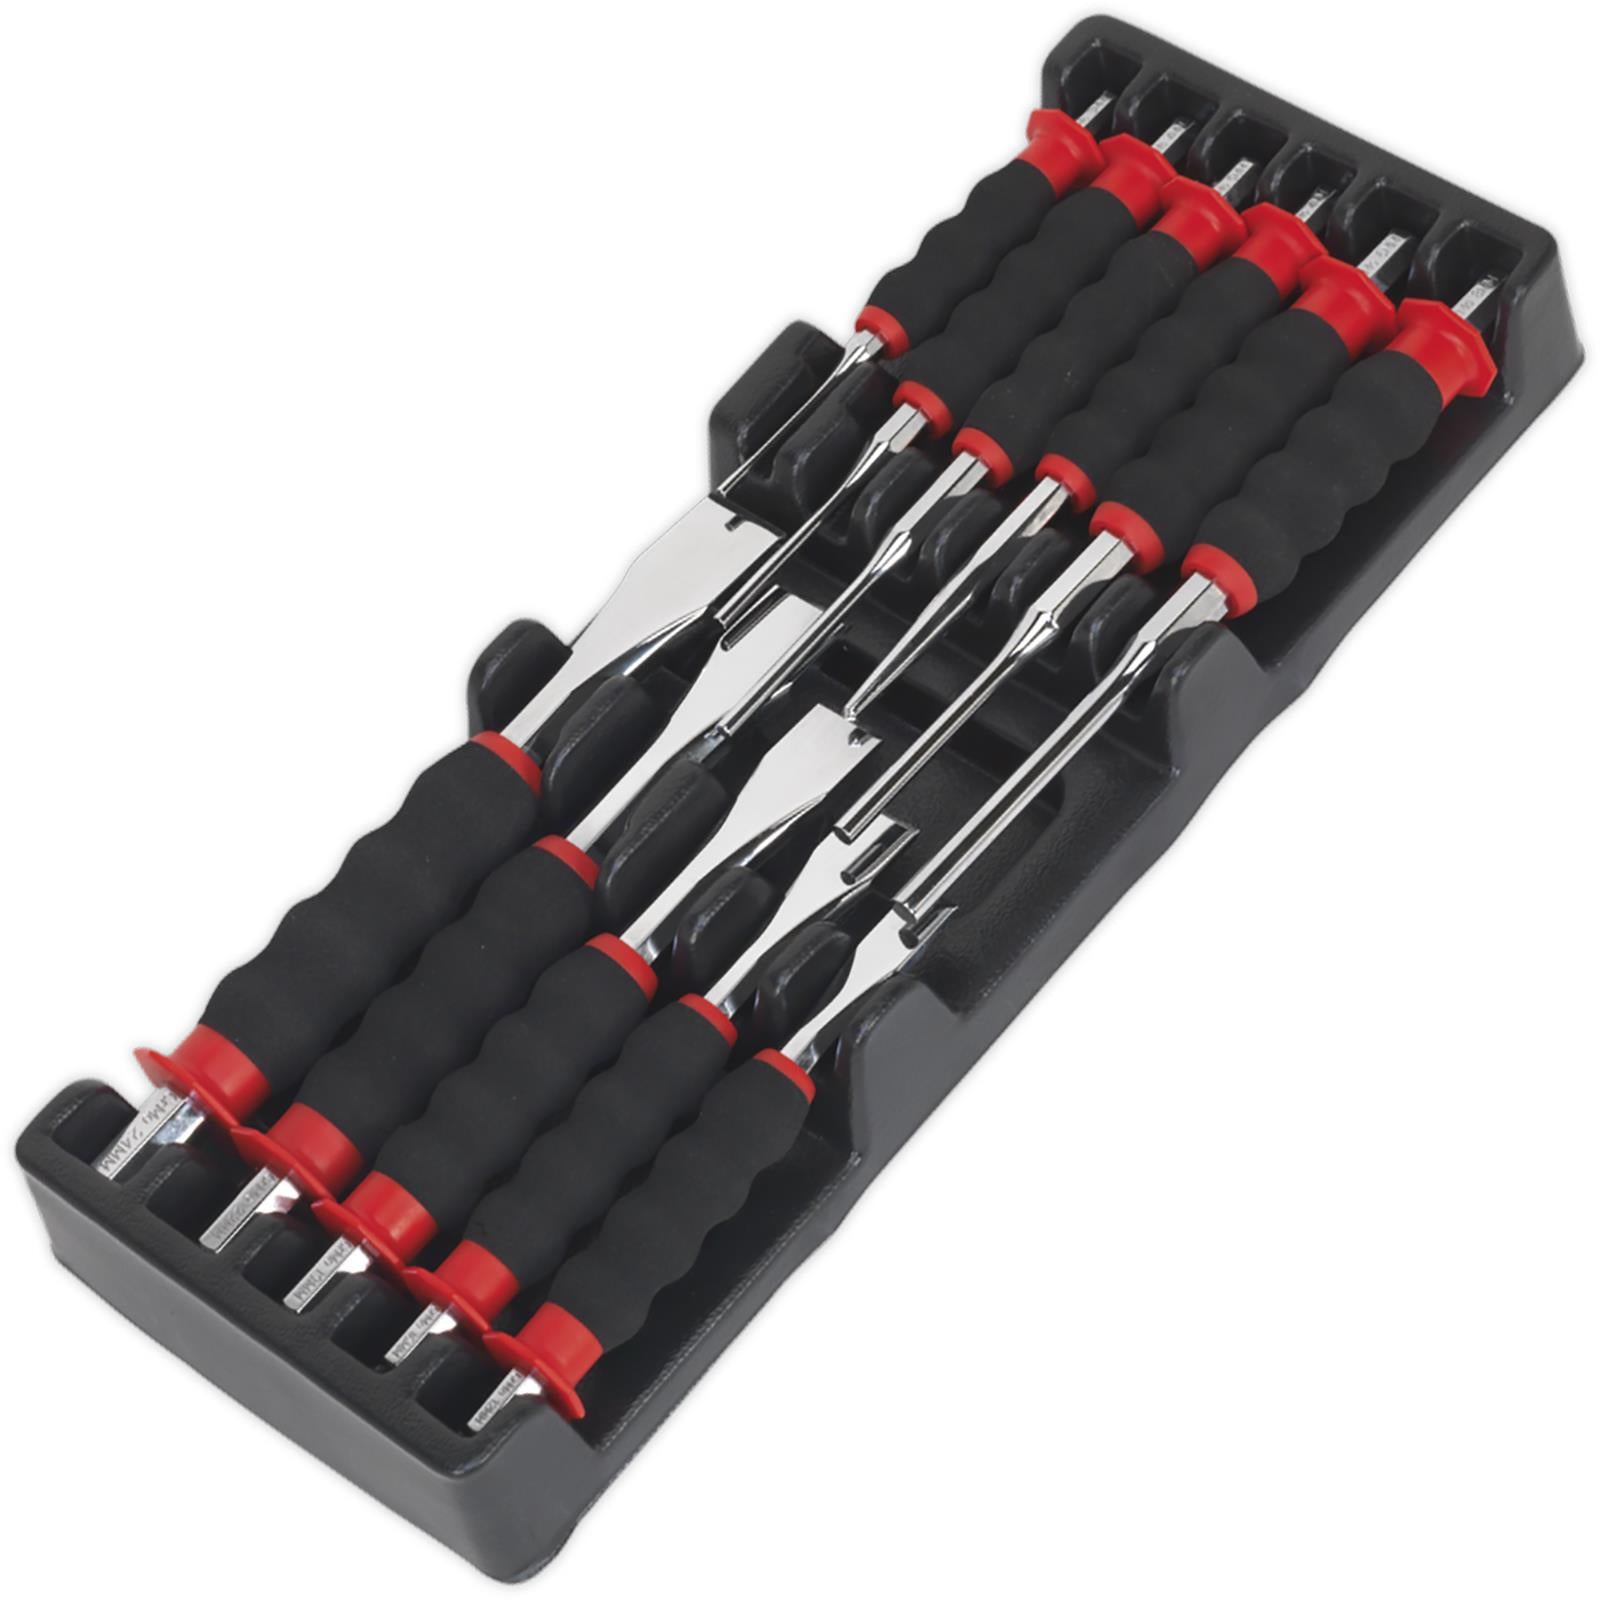 Sealey Sheathed Punch and Chisel Set 11 Piece Premier 3-8mm Punches 12-24mm Chisels